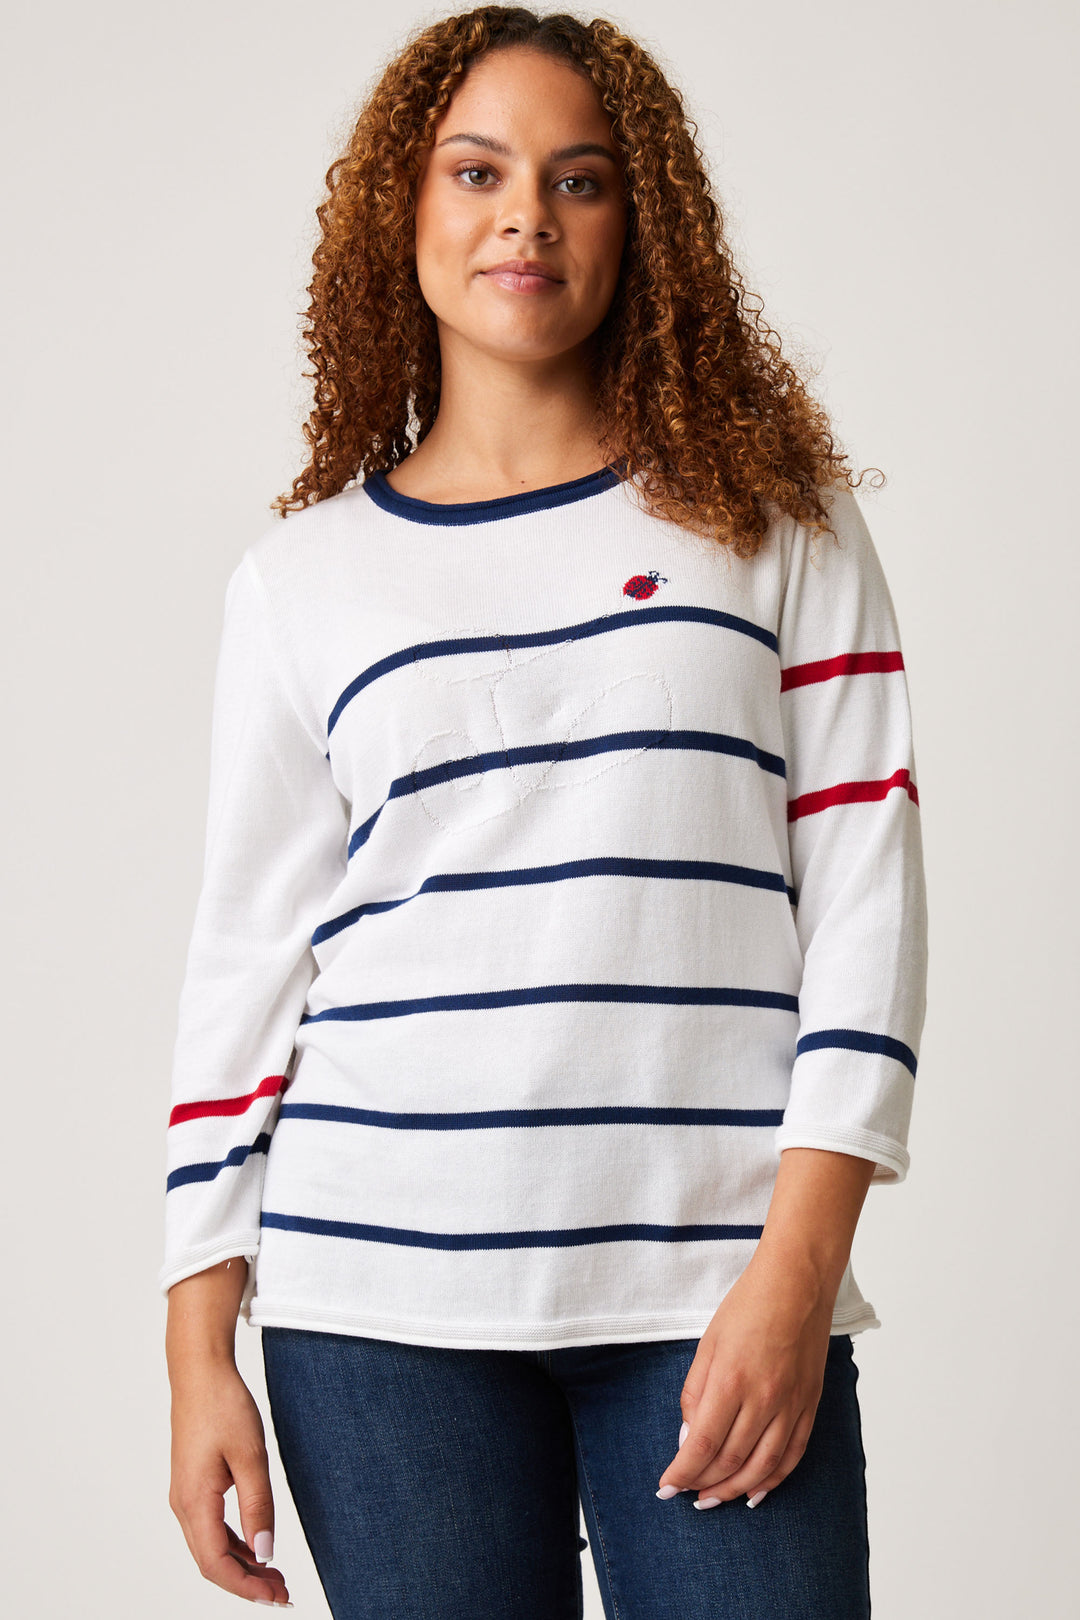 Cotton Country Spring 2024 a knit cotton sweater top with a playful stripes design, 3/4 sleeves and a round neck. 